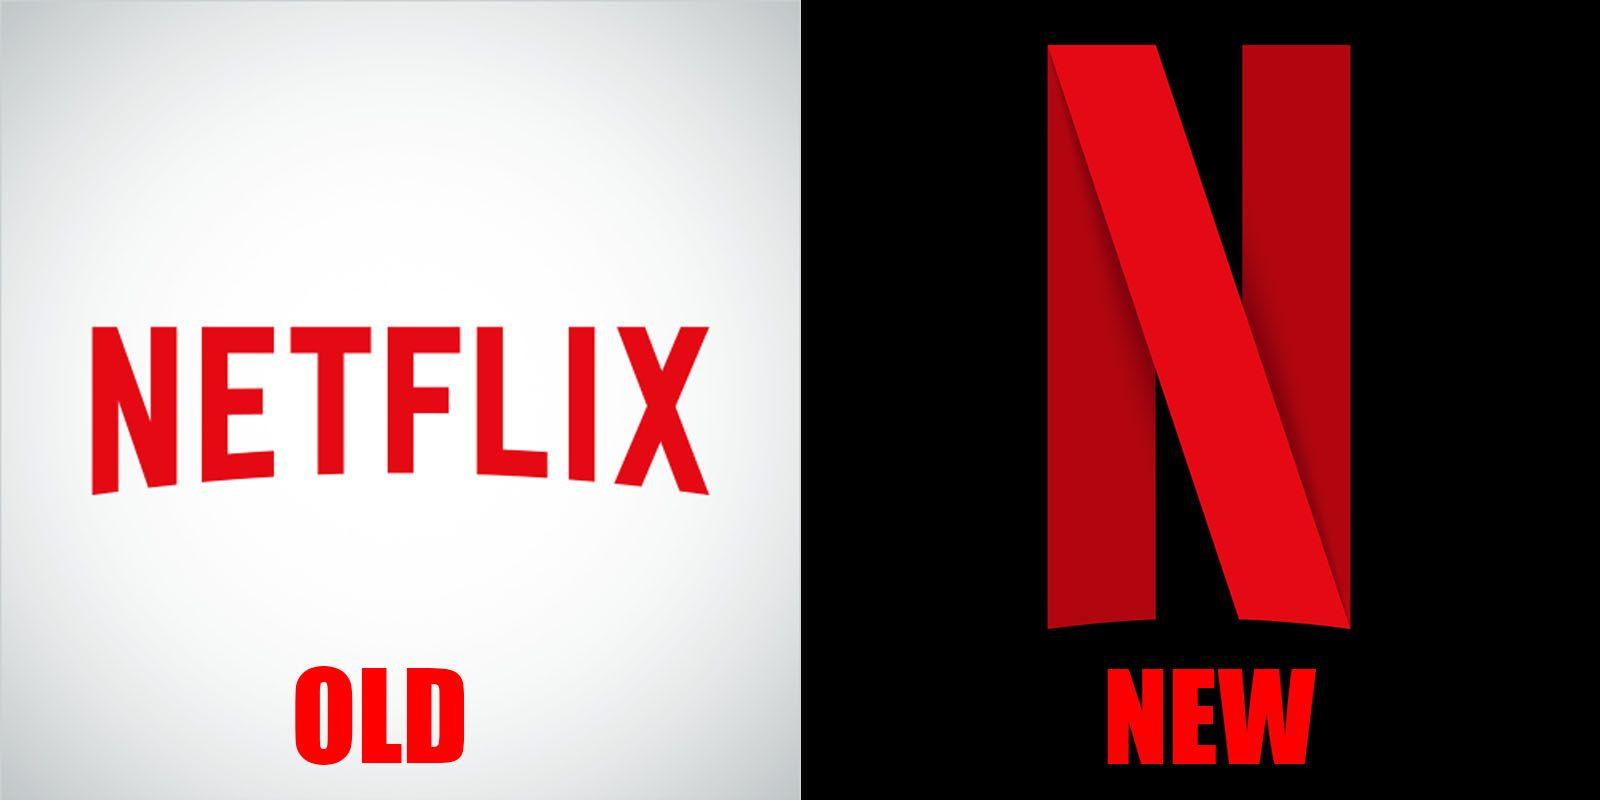 Only with Red N Logo - Netflix Has Not Revamped its Logo, It Only Has A New Icon